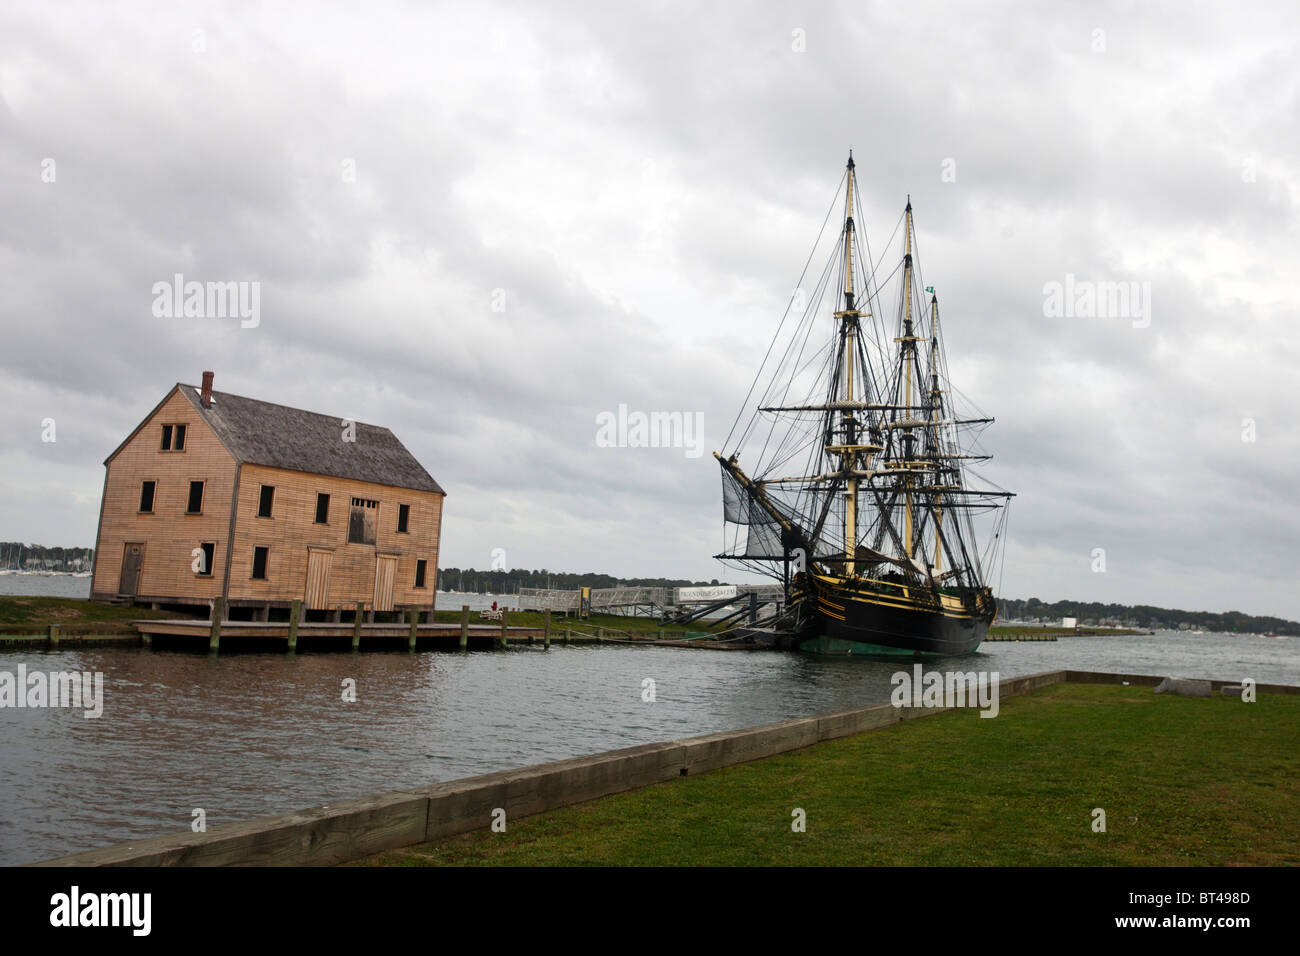 Friendship of Salem docked next to a boarded up saltbox style building, Salem Maritime National Historic Site Stock Photo